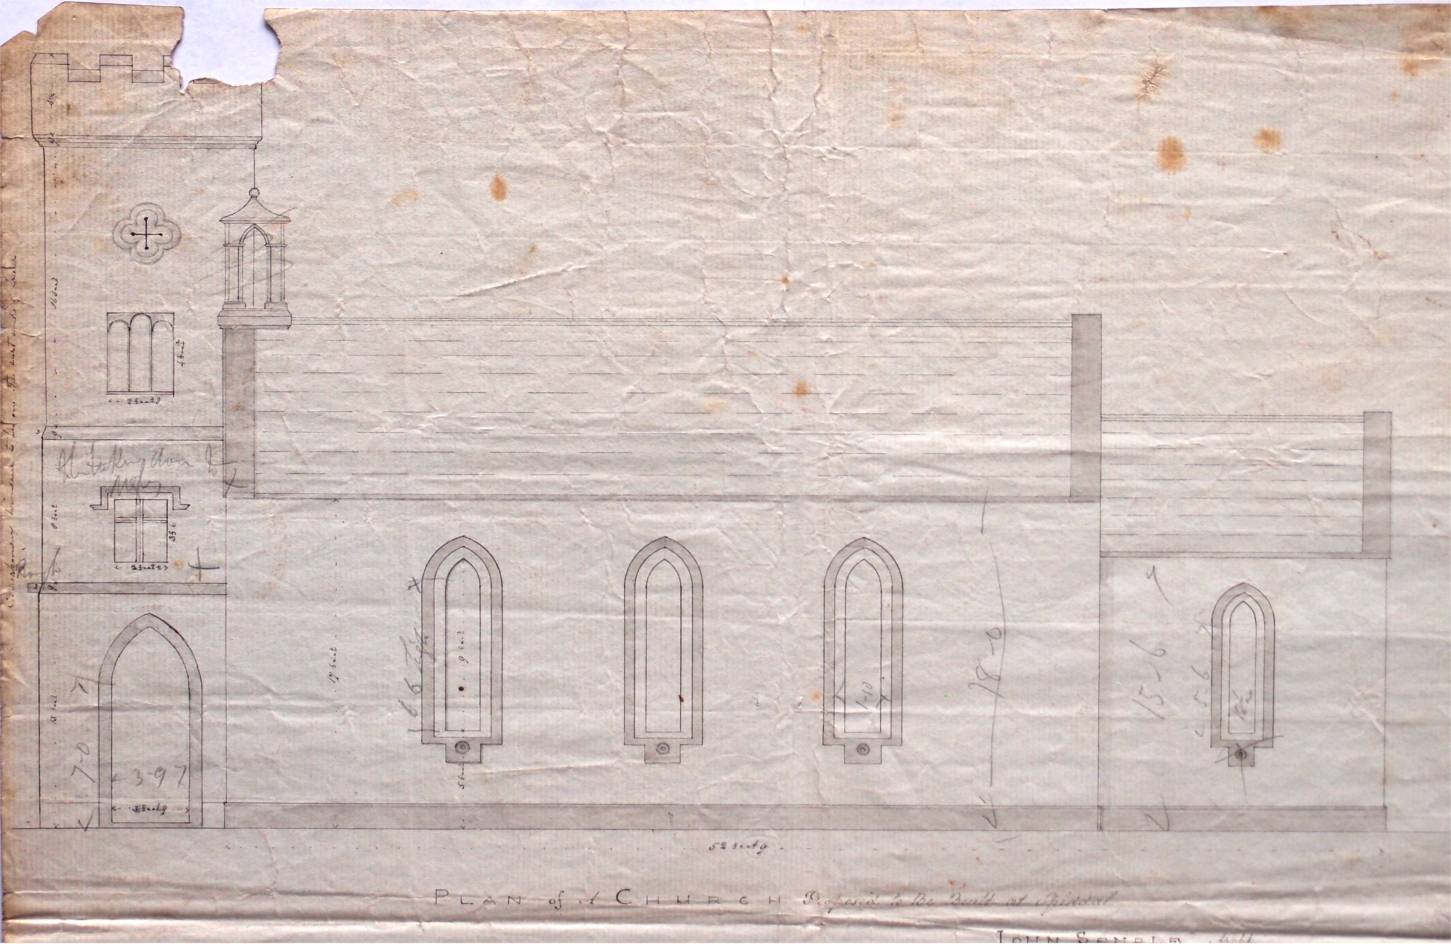 The church for Spiddal parish was church designed by a John Semple (possibly the Dublin architect). His plan shows a simple nave and chancel church with alternative west gable arrangements. Semple allowed for either a bellcote on the west gable or a four stage western tower and entrance porch with battlemented parapet level, RCB Library PF/26